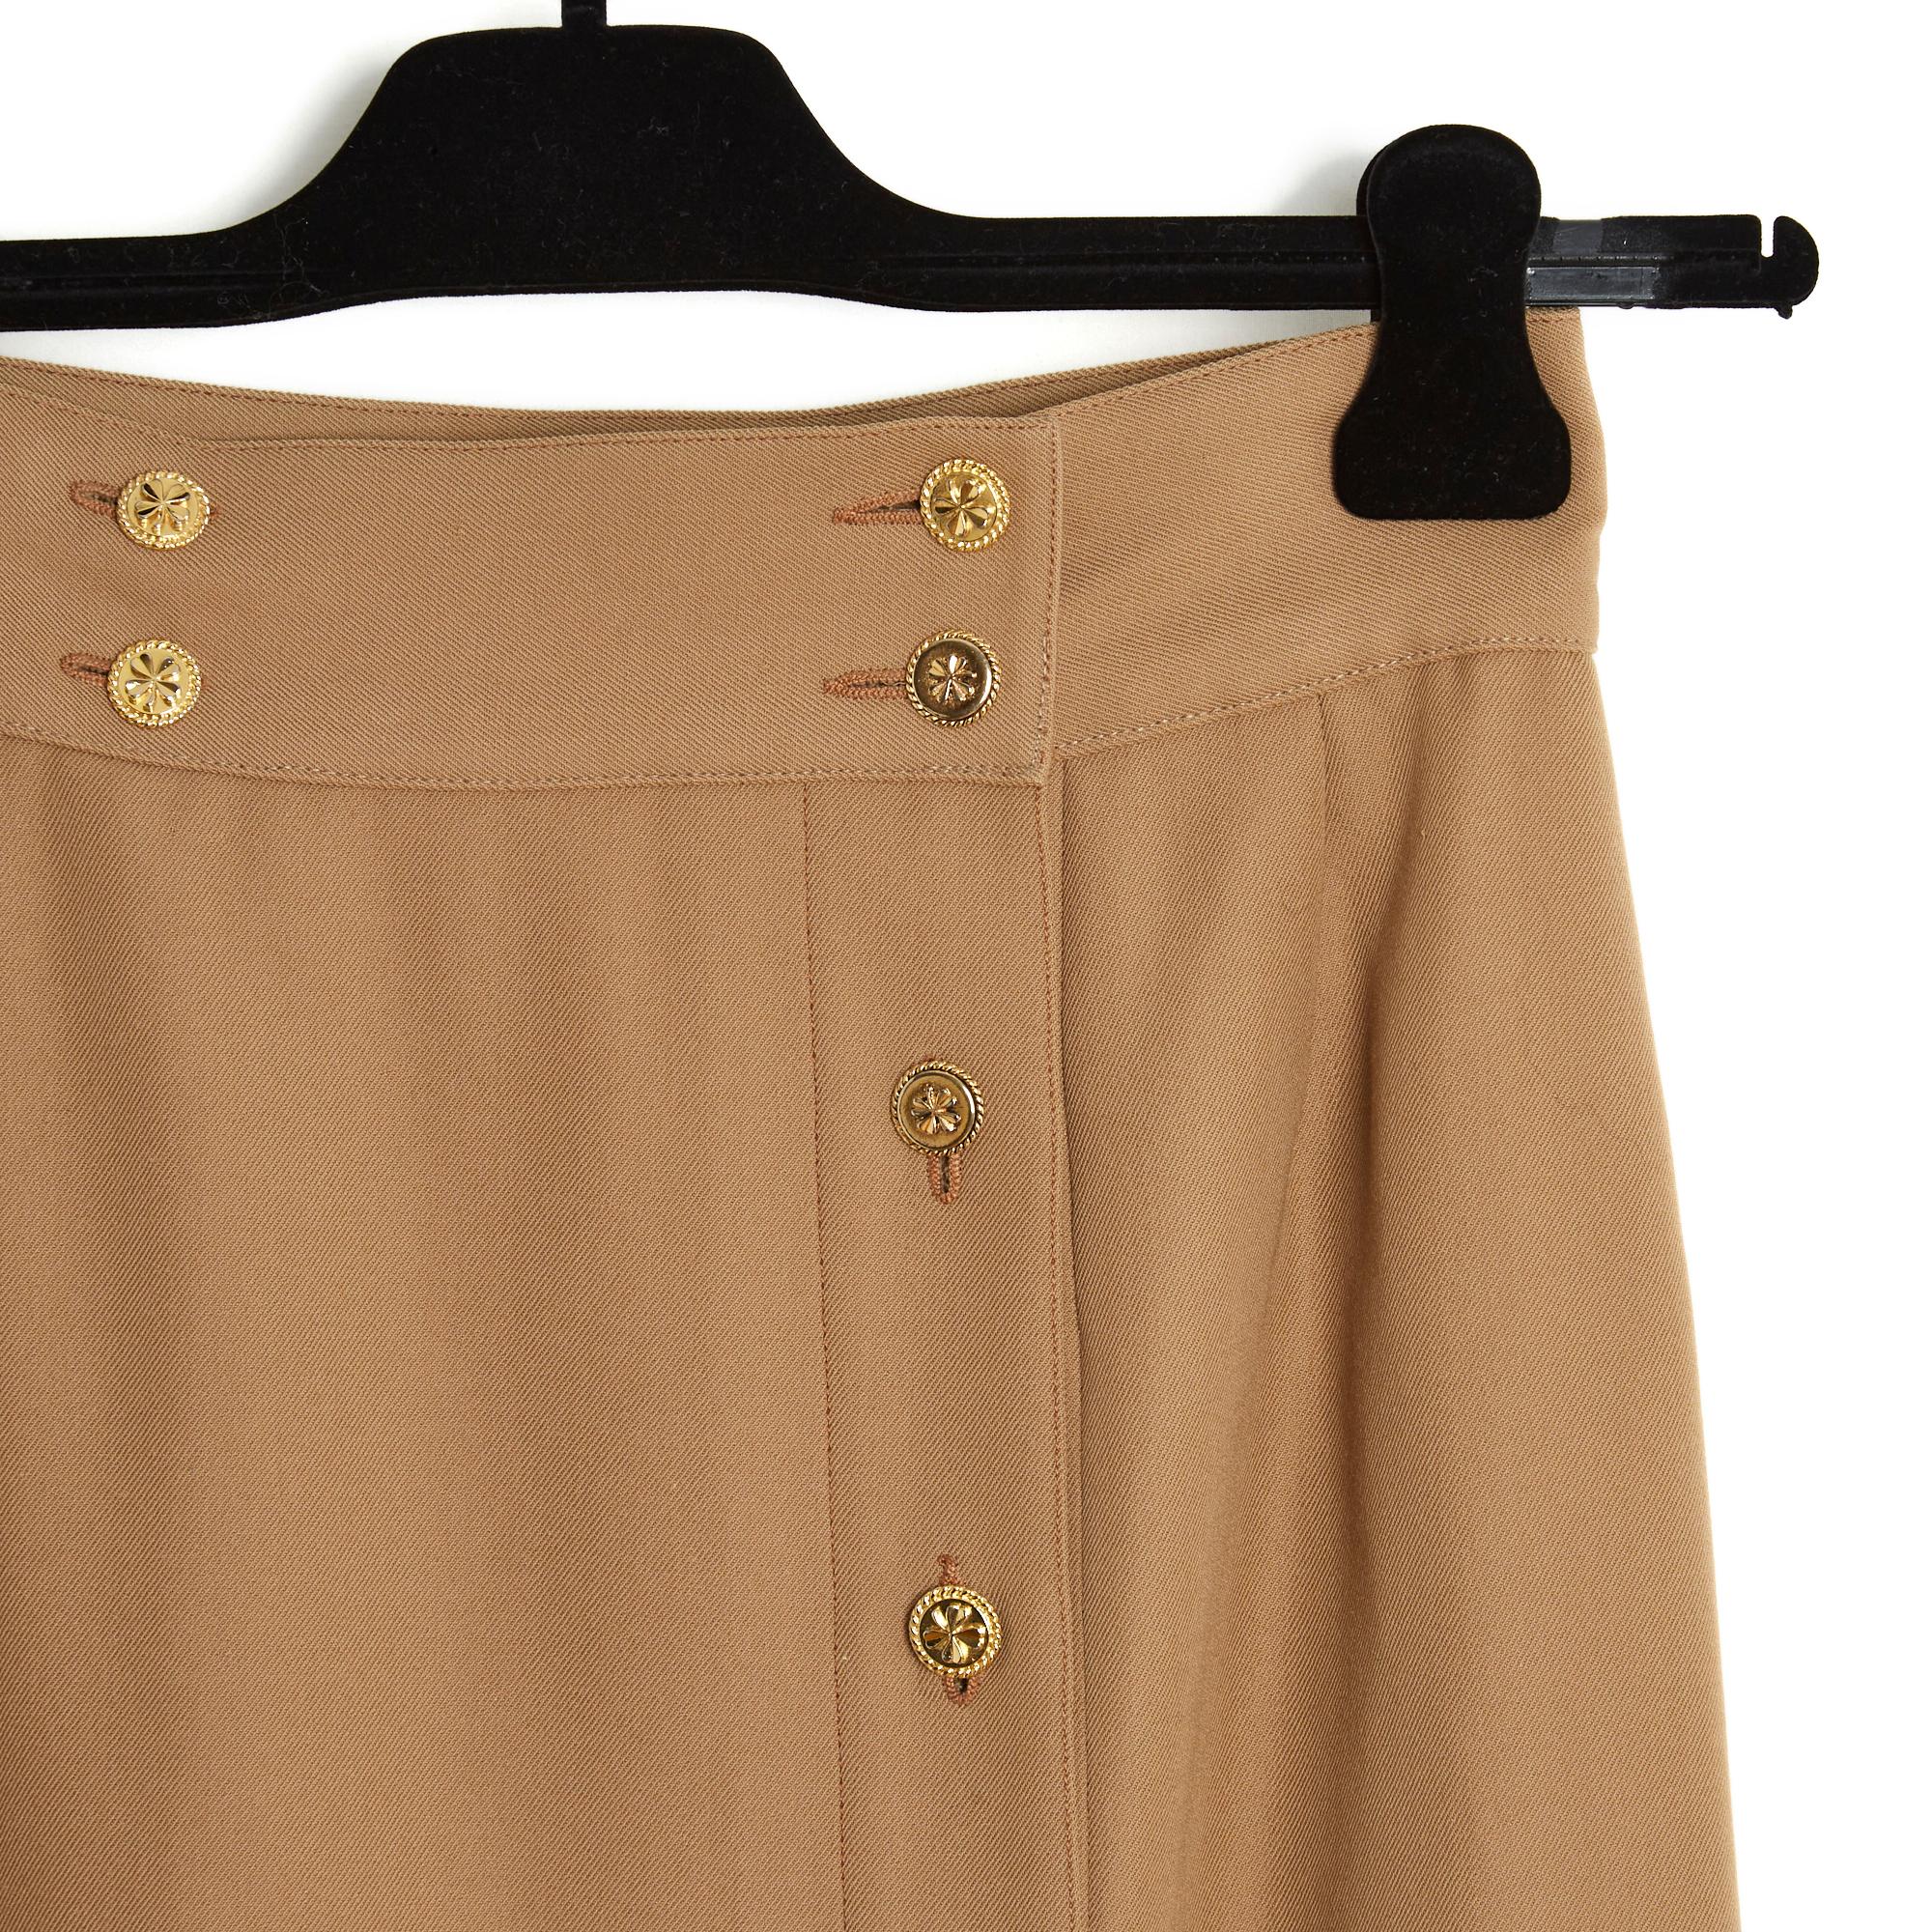 Chanel skirt circa 1990 in camel wraparound wool cloth closed with 4 clover buttons at the waist and 5 along the entire height, matching silk lining. No more composition label or size but the measurements indicate a 36FR: size 36 cm, length 60 cm.